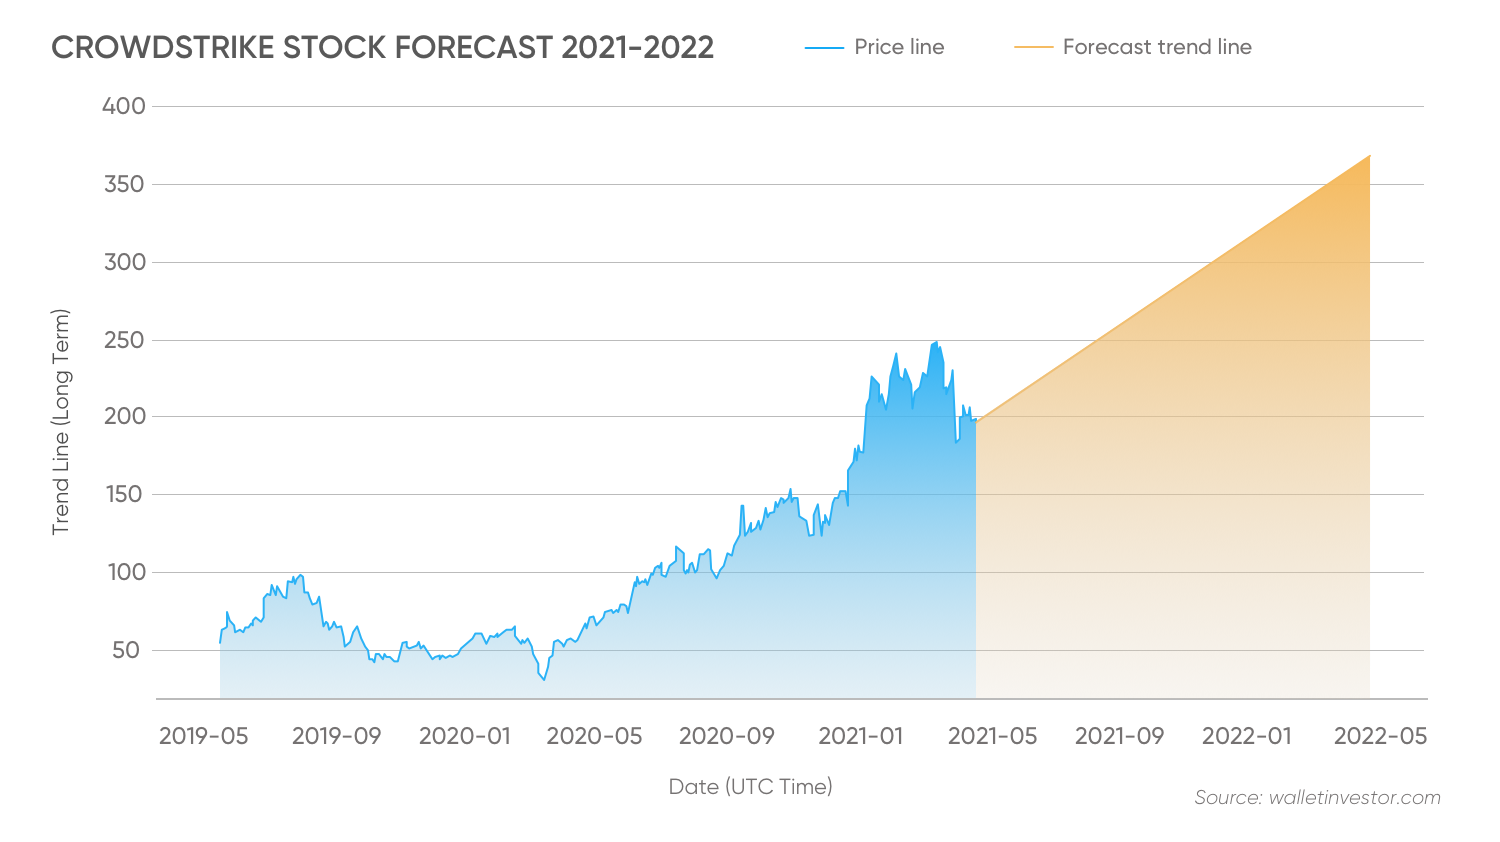 Crowdstrike (CRWD) stock forecast 20212025 strong earnings make it a top growth stock pick